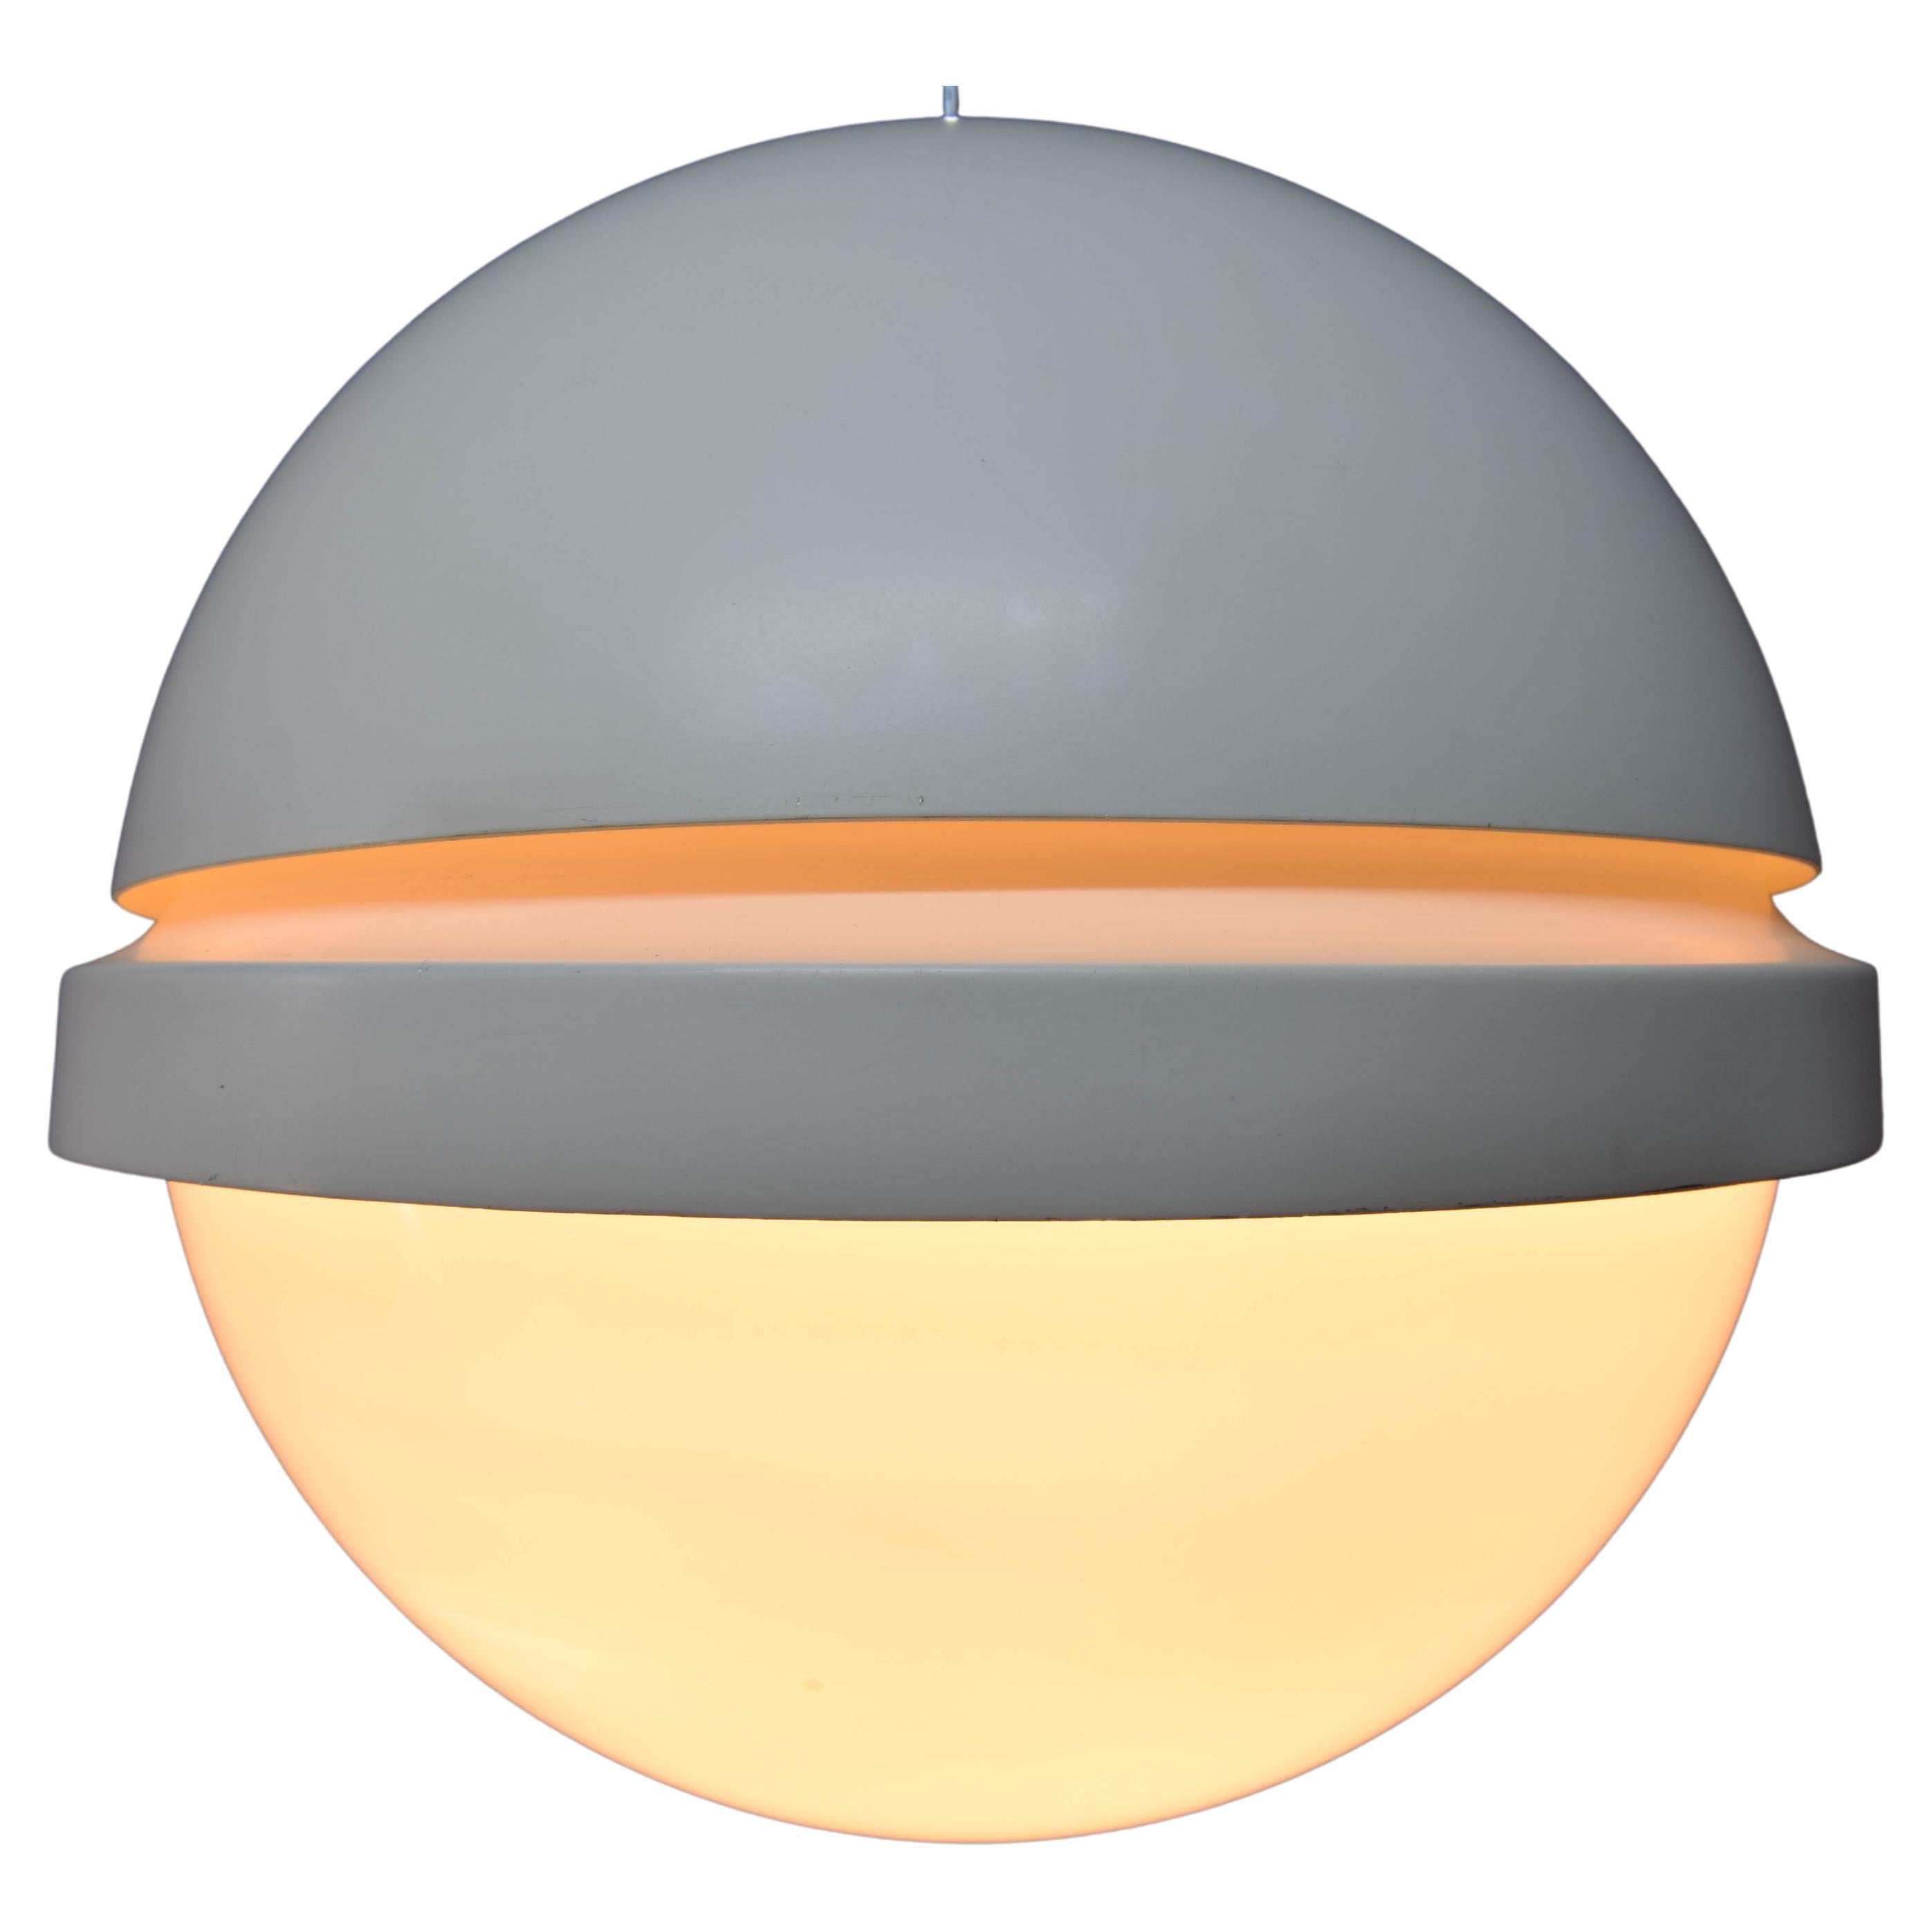 Mid-Century Modern Moon Ceiling Lamp by Andre Ricard for Metalarte Spain, 70s